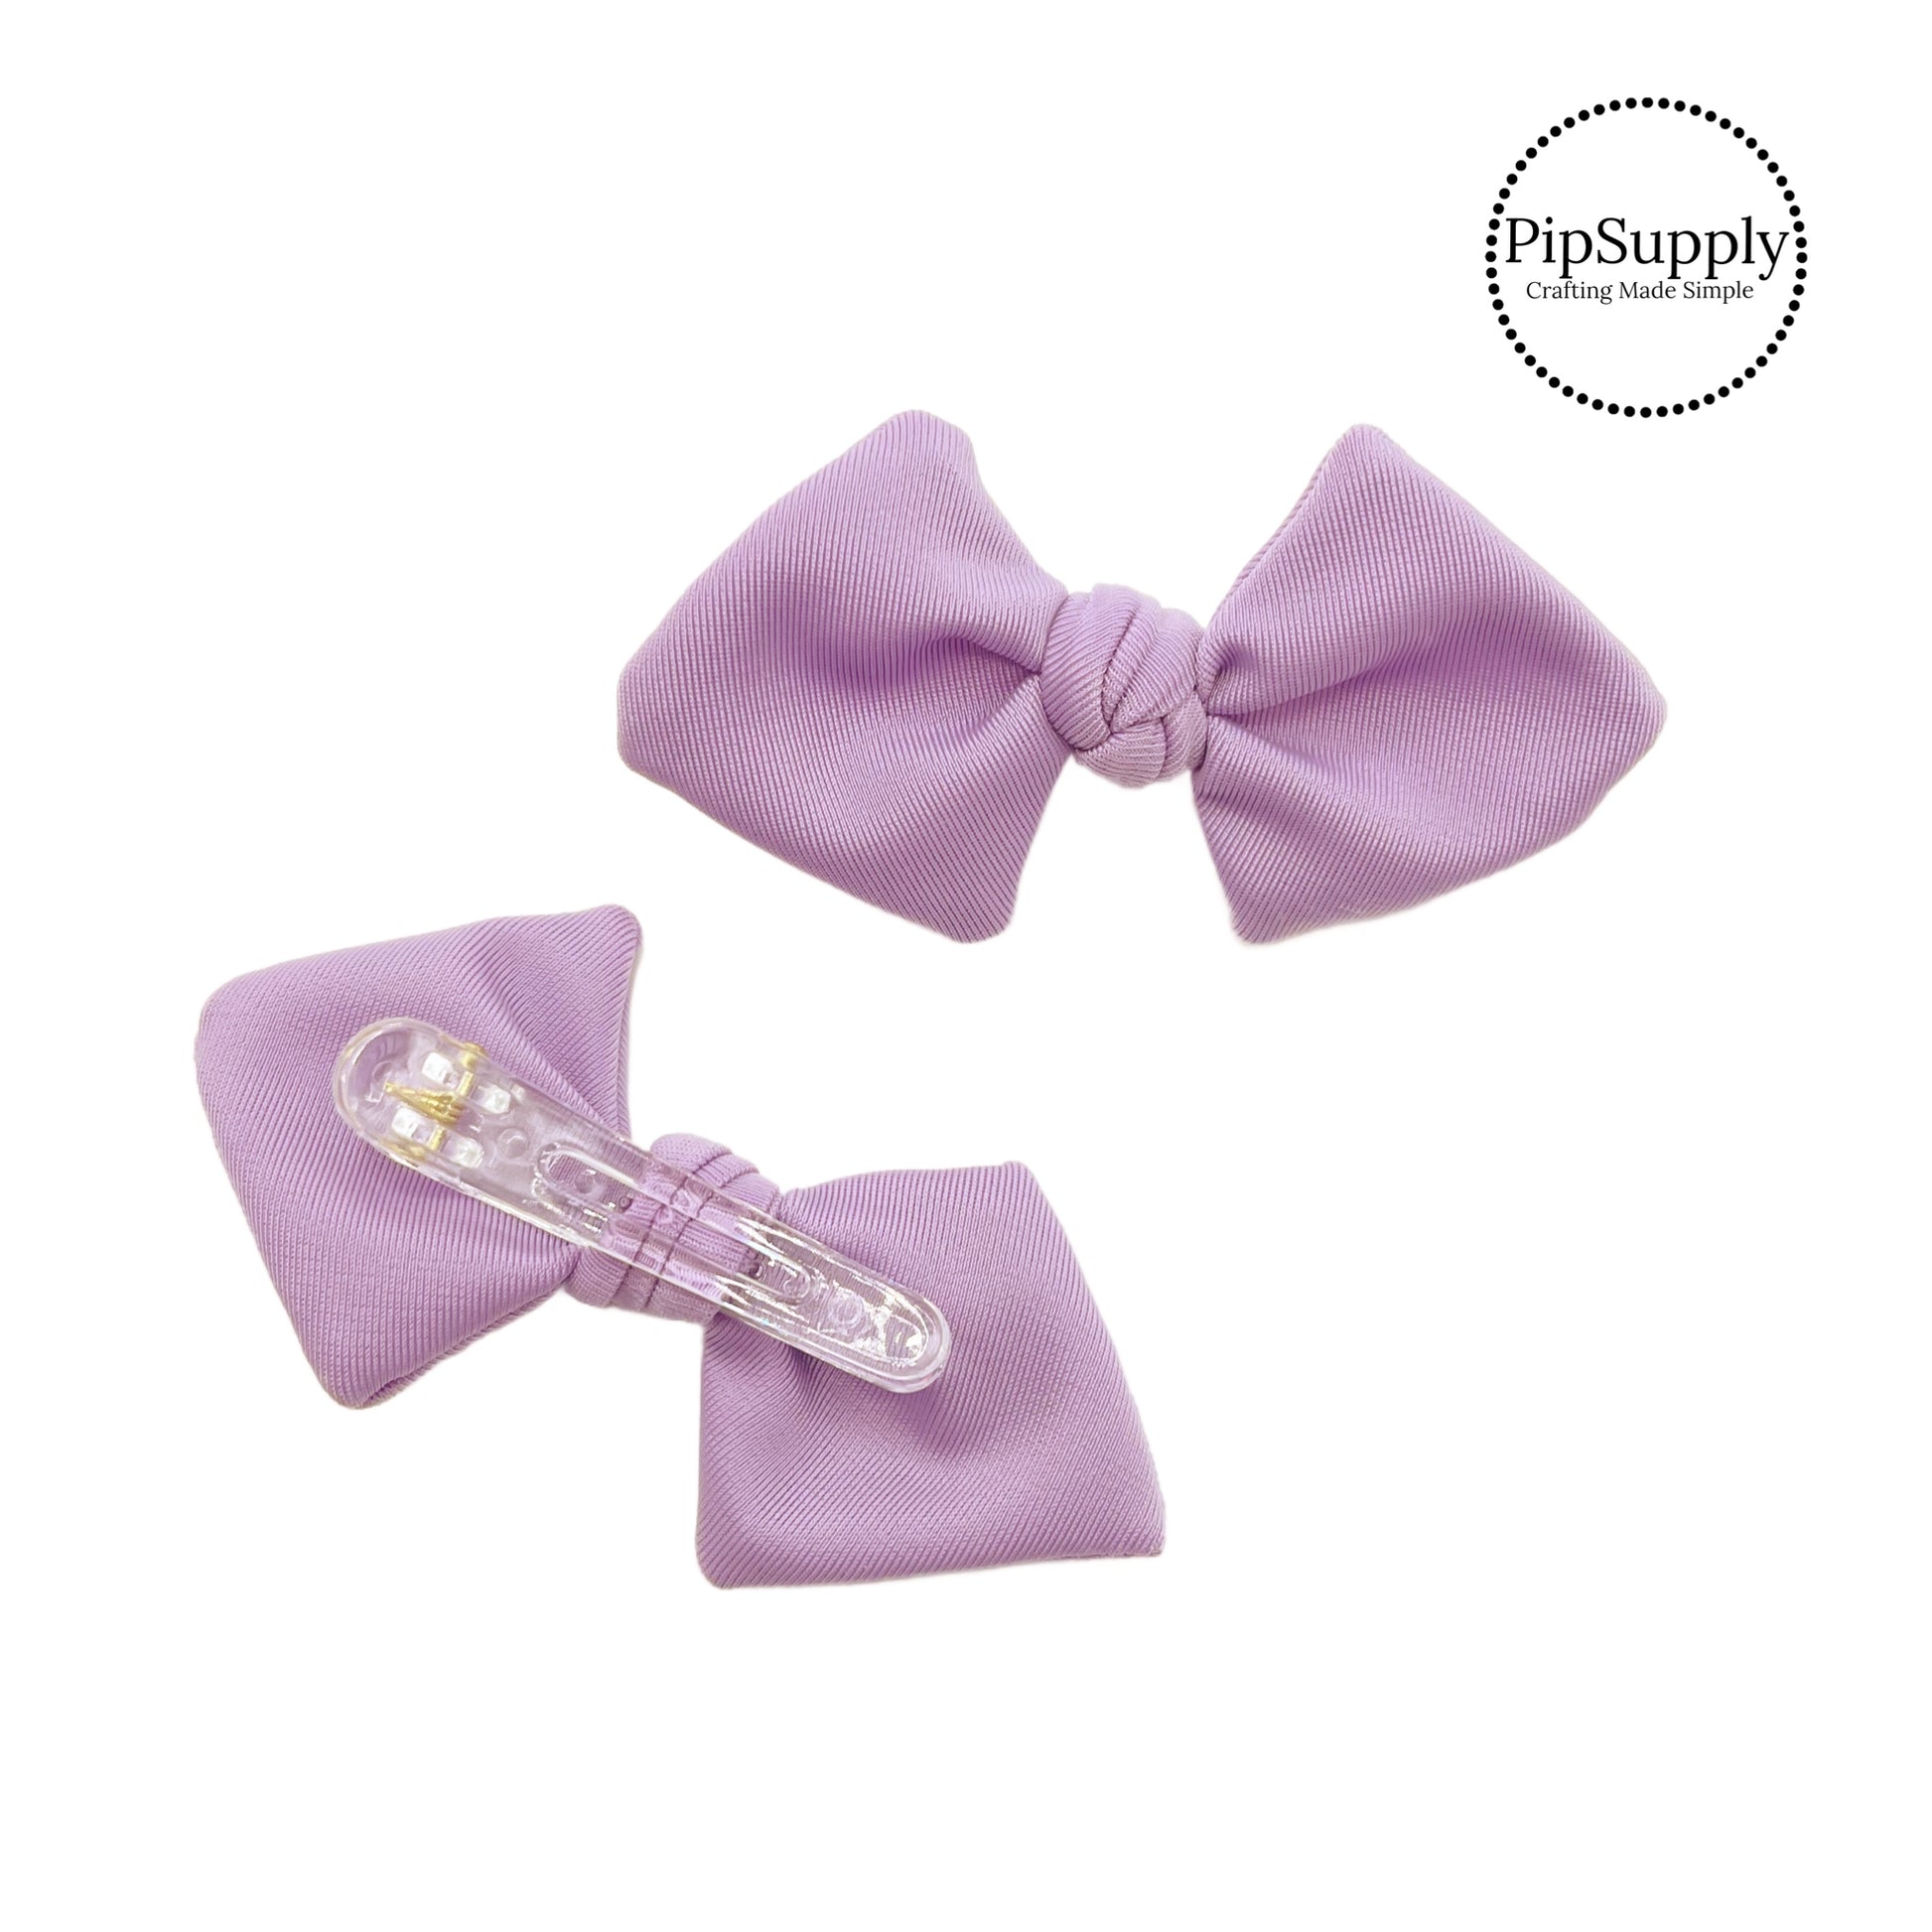 These lavender swim bows have a two layer swimsuit fabric bow with edges that are securely folded and sewn providing a professional and high quality seam. Fabric is thick high quality not coarse or stiff and the pattern is visible on all sides. Bow comes pre-tied on a clear plastic clip.